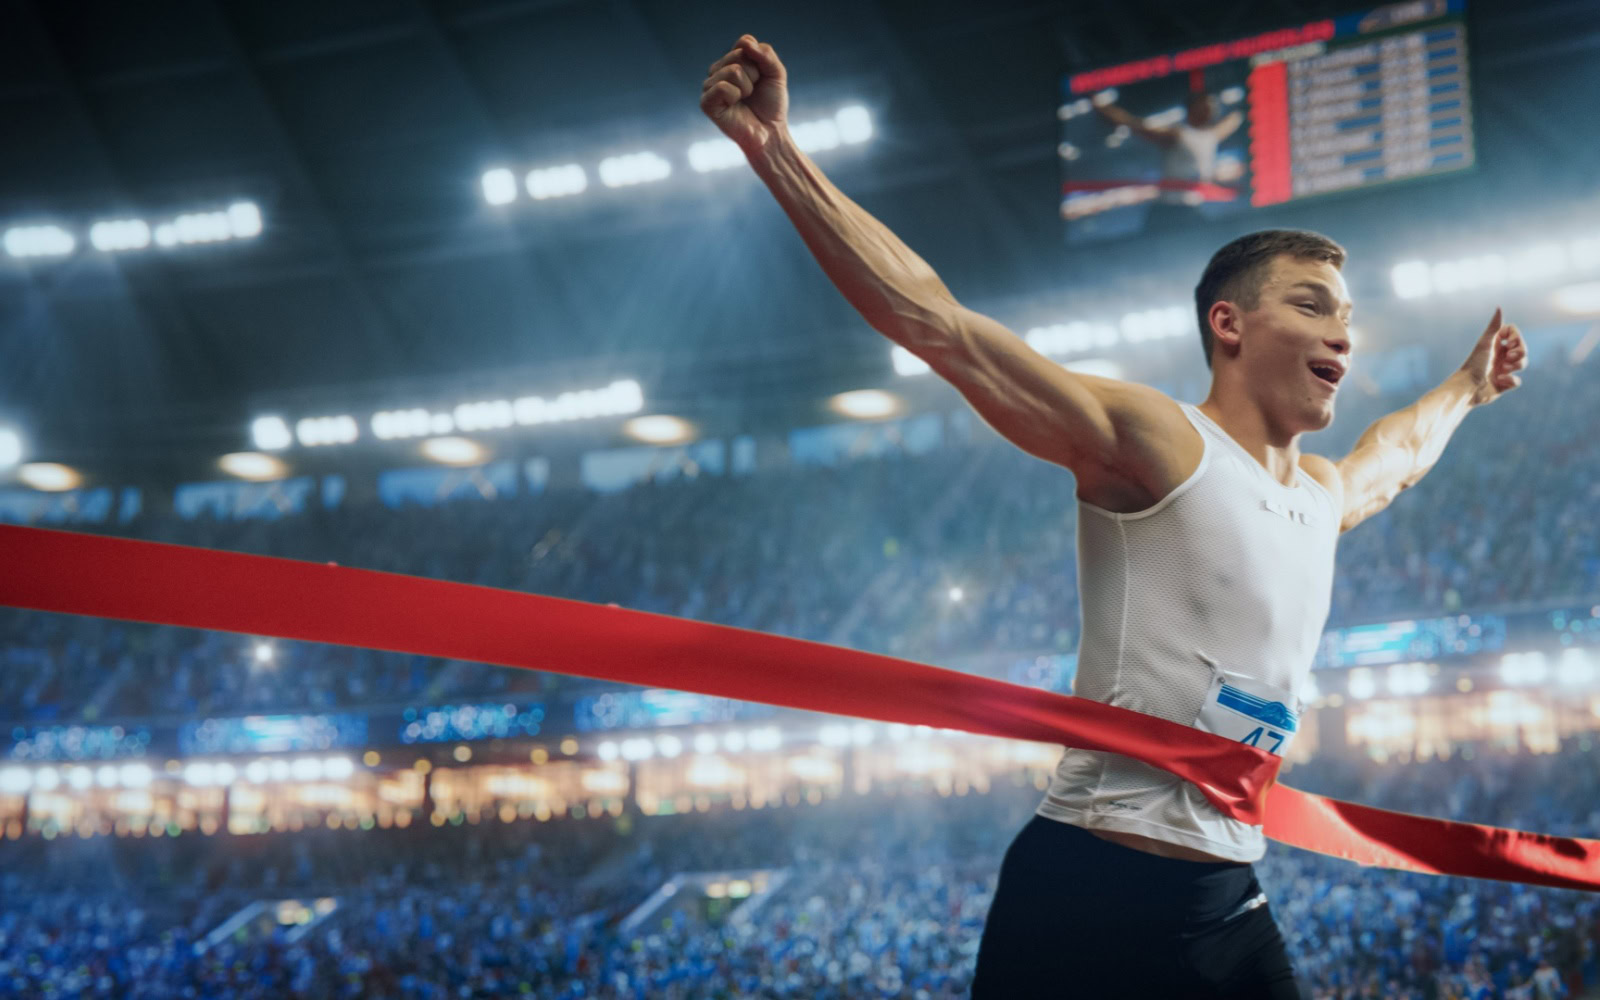 Top 7 Most Emotionally Engaging Olympics Ads (P&G Campaigns Are Winning) [Video]